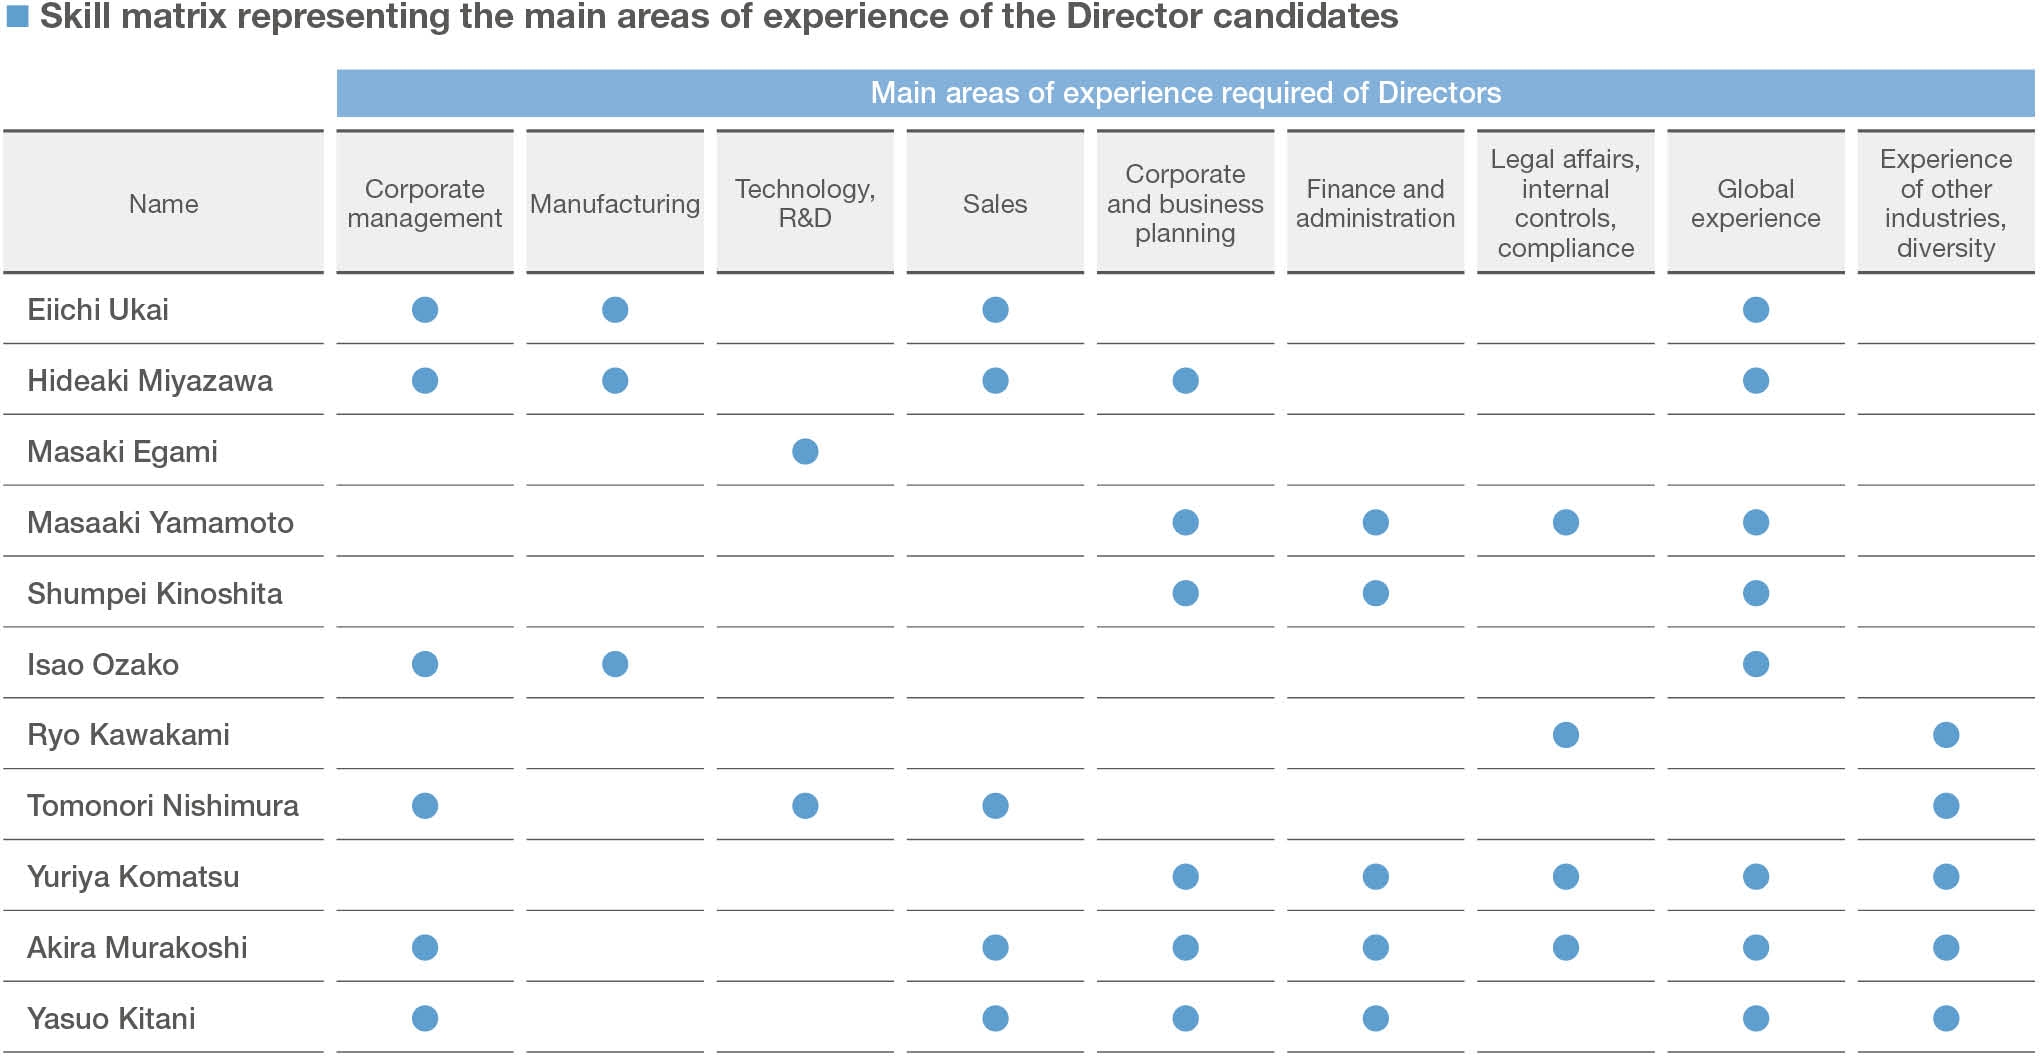 Skill matrix representing the main areas of experience of Director candidates